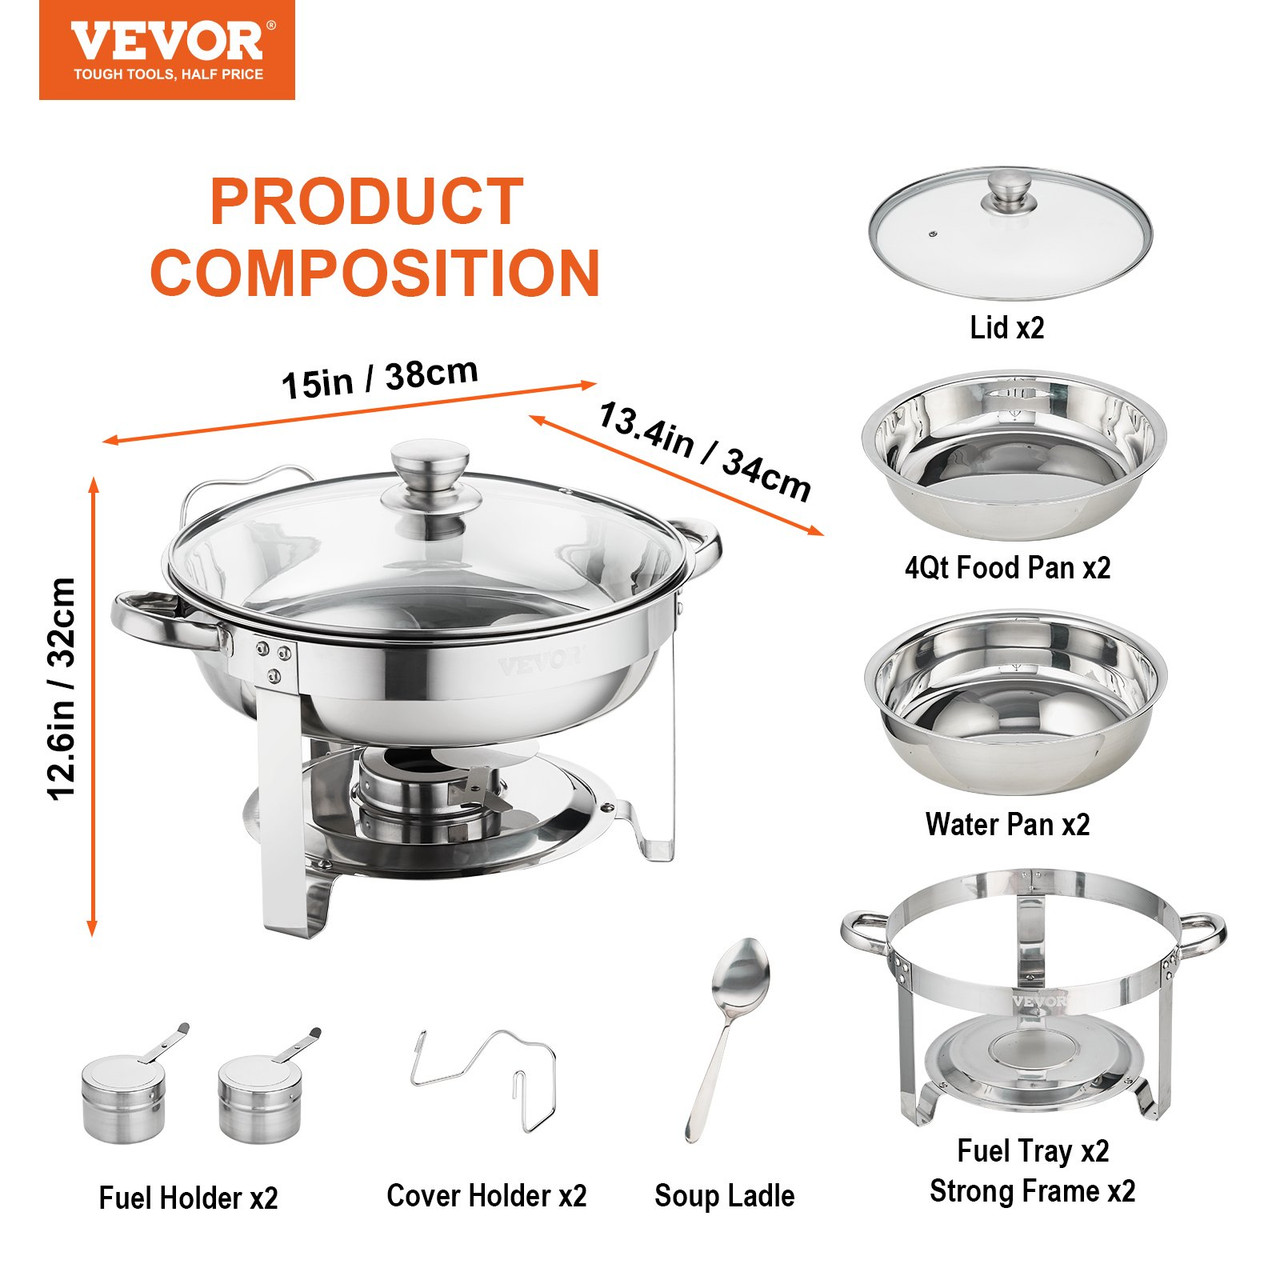 VEVOR 2-Packs Round Chafer Roll Top Chafer 6 qt. Stainless Steel